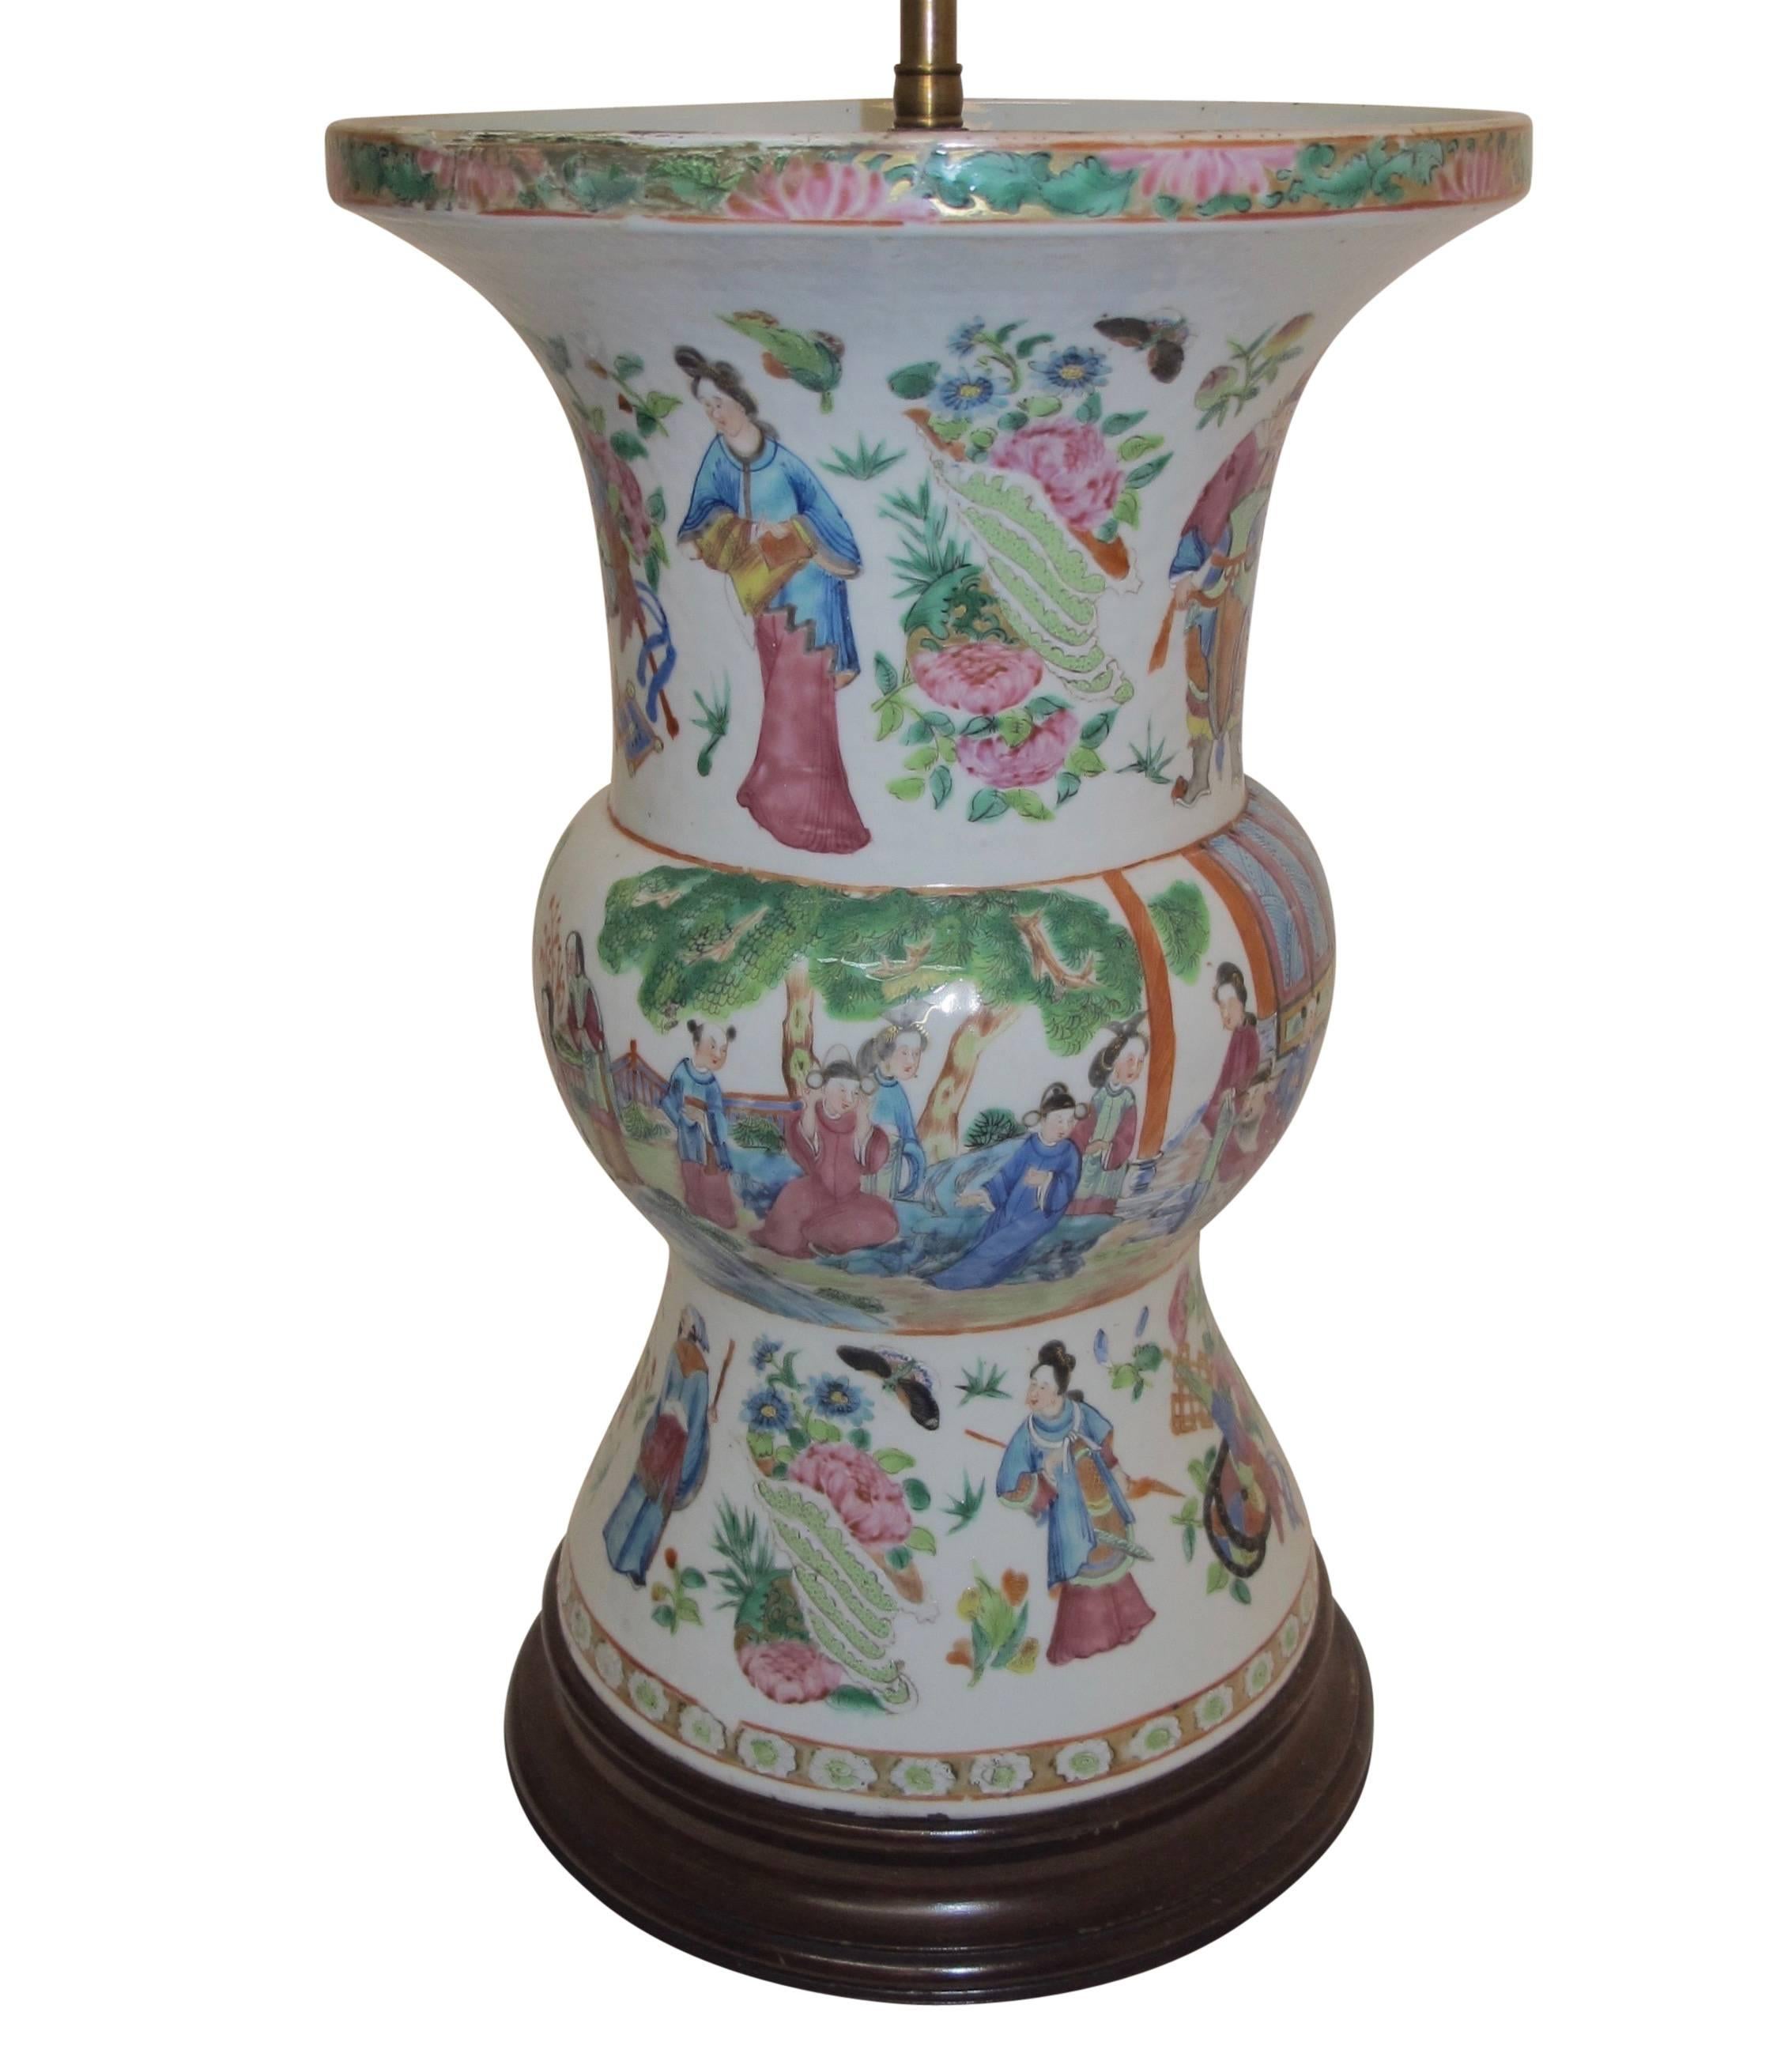 Hand-Painted Famille Rose Vase Lamp with Hand Painted Figures, Chinese 19th Century